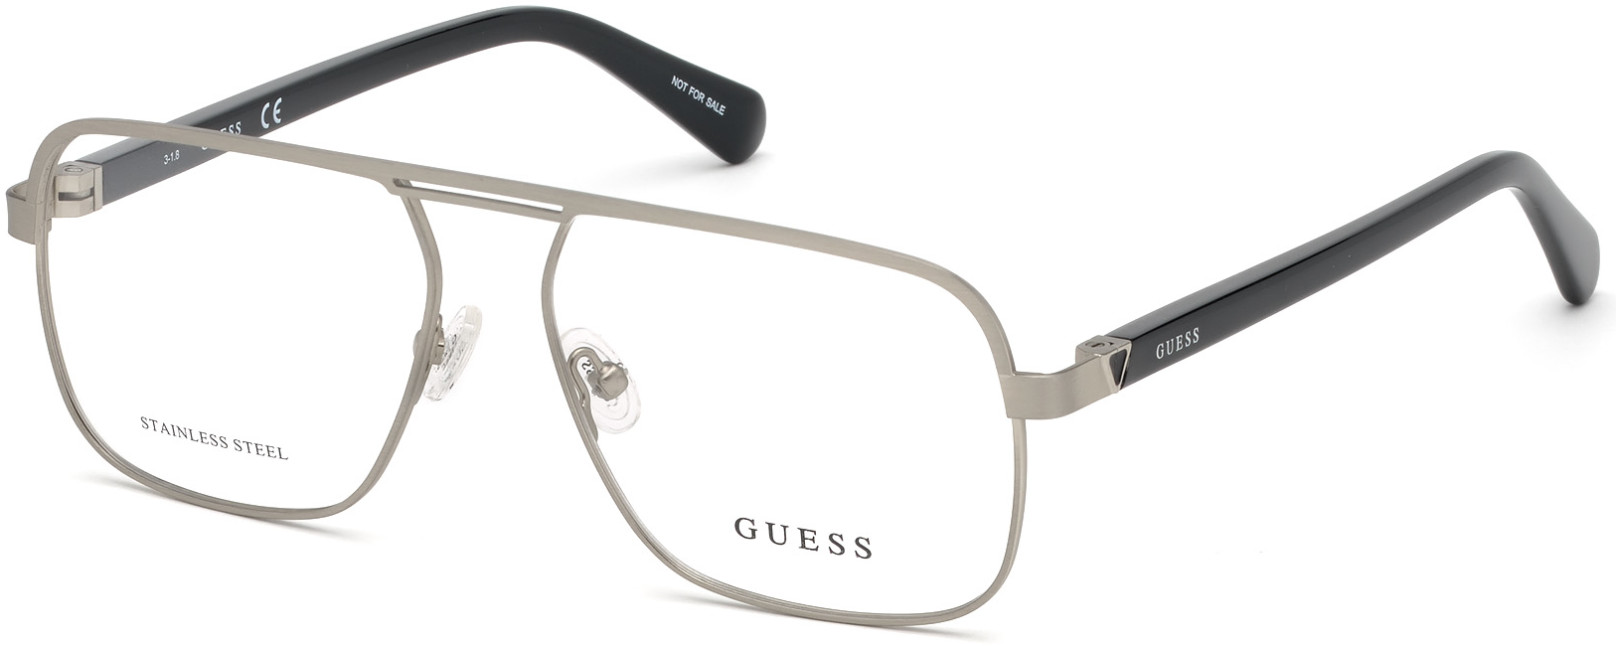 GUESS 1966 010